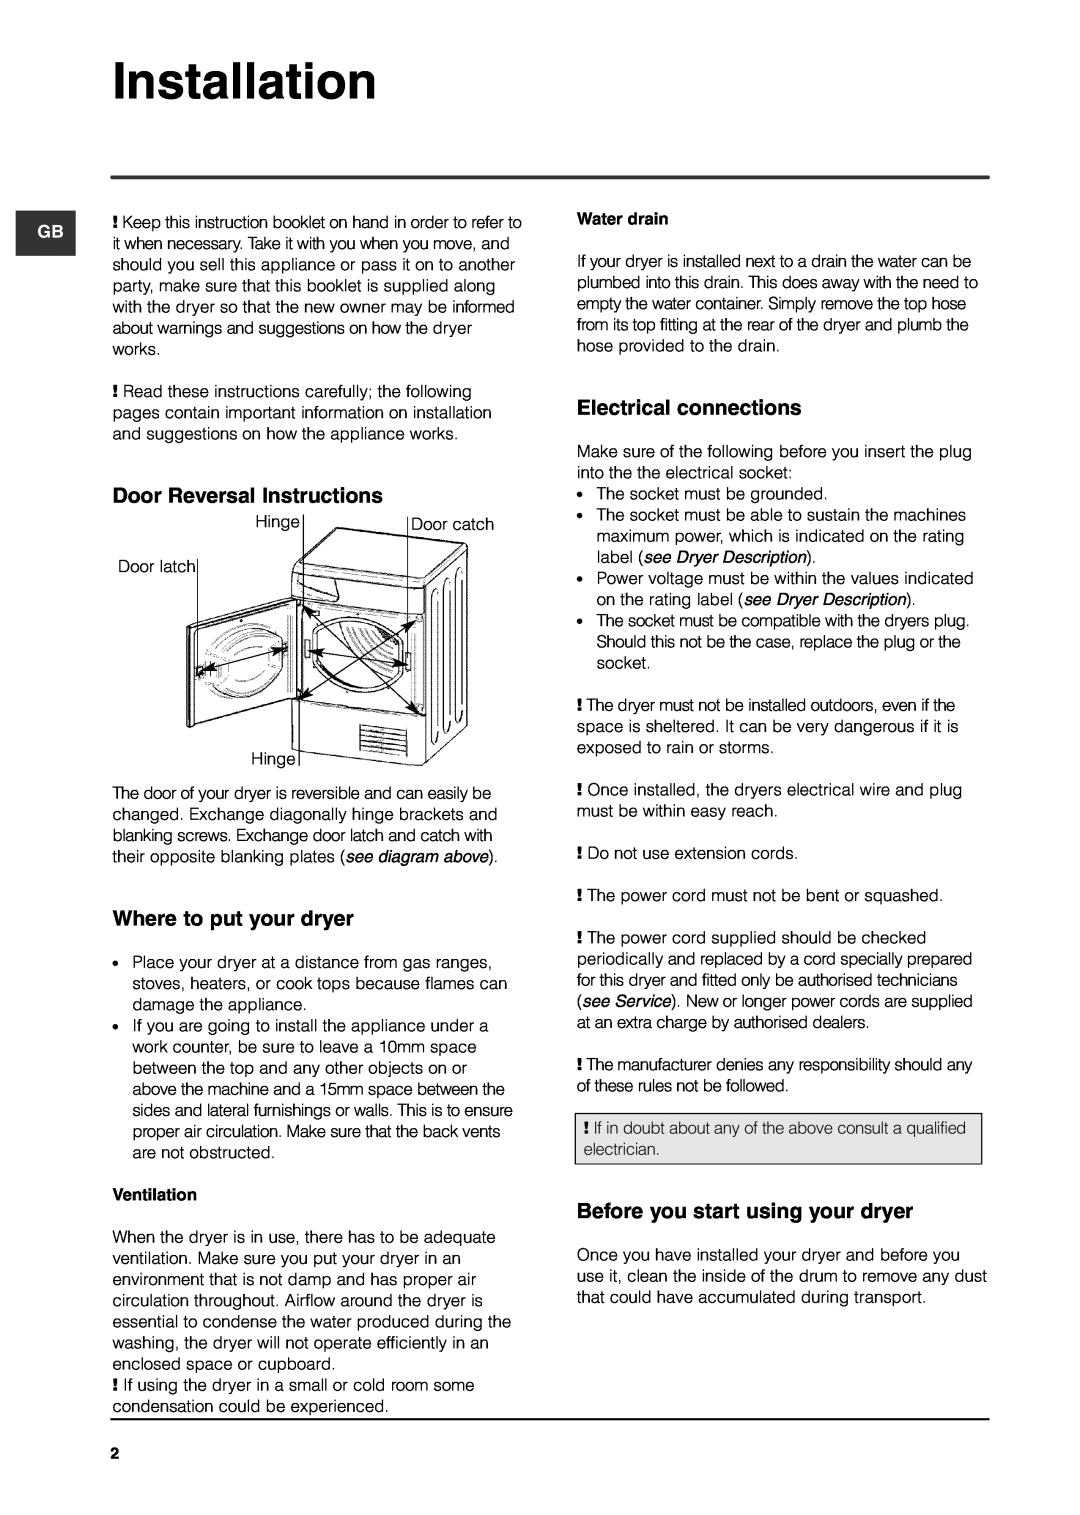 Indesit IS70C manual Installation, Door Reversal Instructions, Where to put your dryer, Electrical connections, Ventilation 